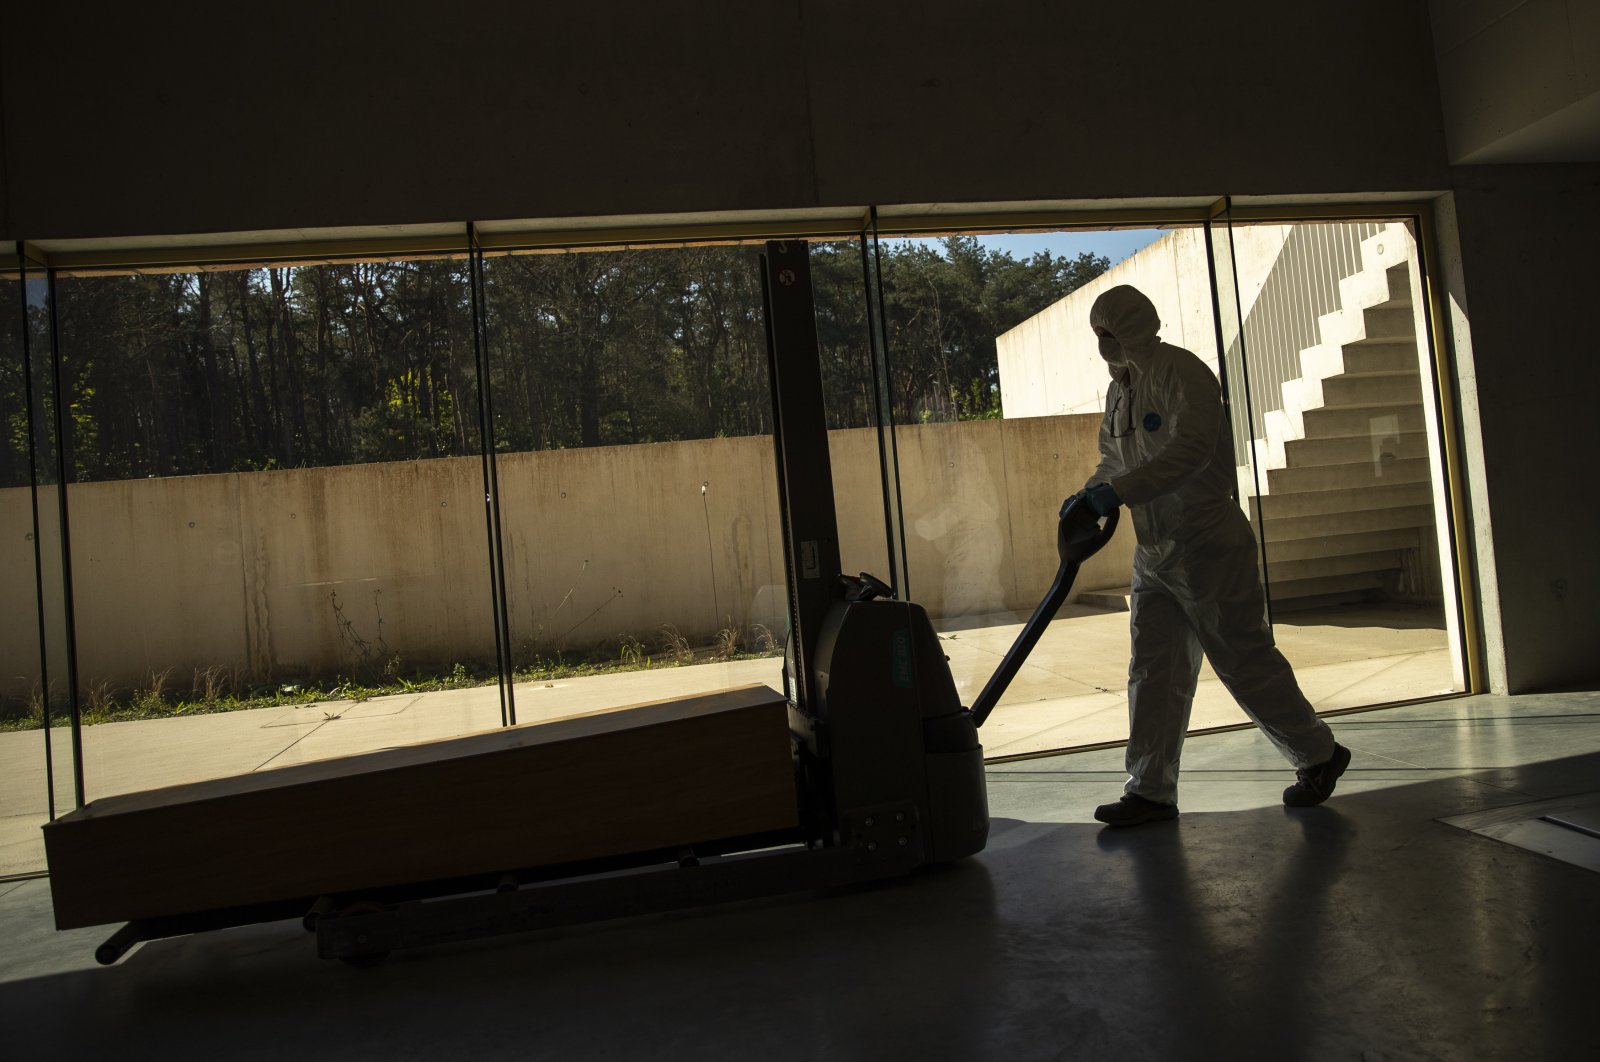 A worker, wearing full protective gear, moves a casket of a COVID-19 deceased at the Pontes crematorium and funeral center in Lommel, Belgium, Friday, April 10, 2020. (AP Photo)